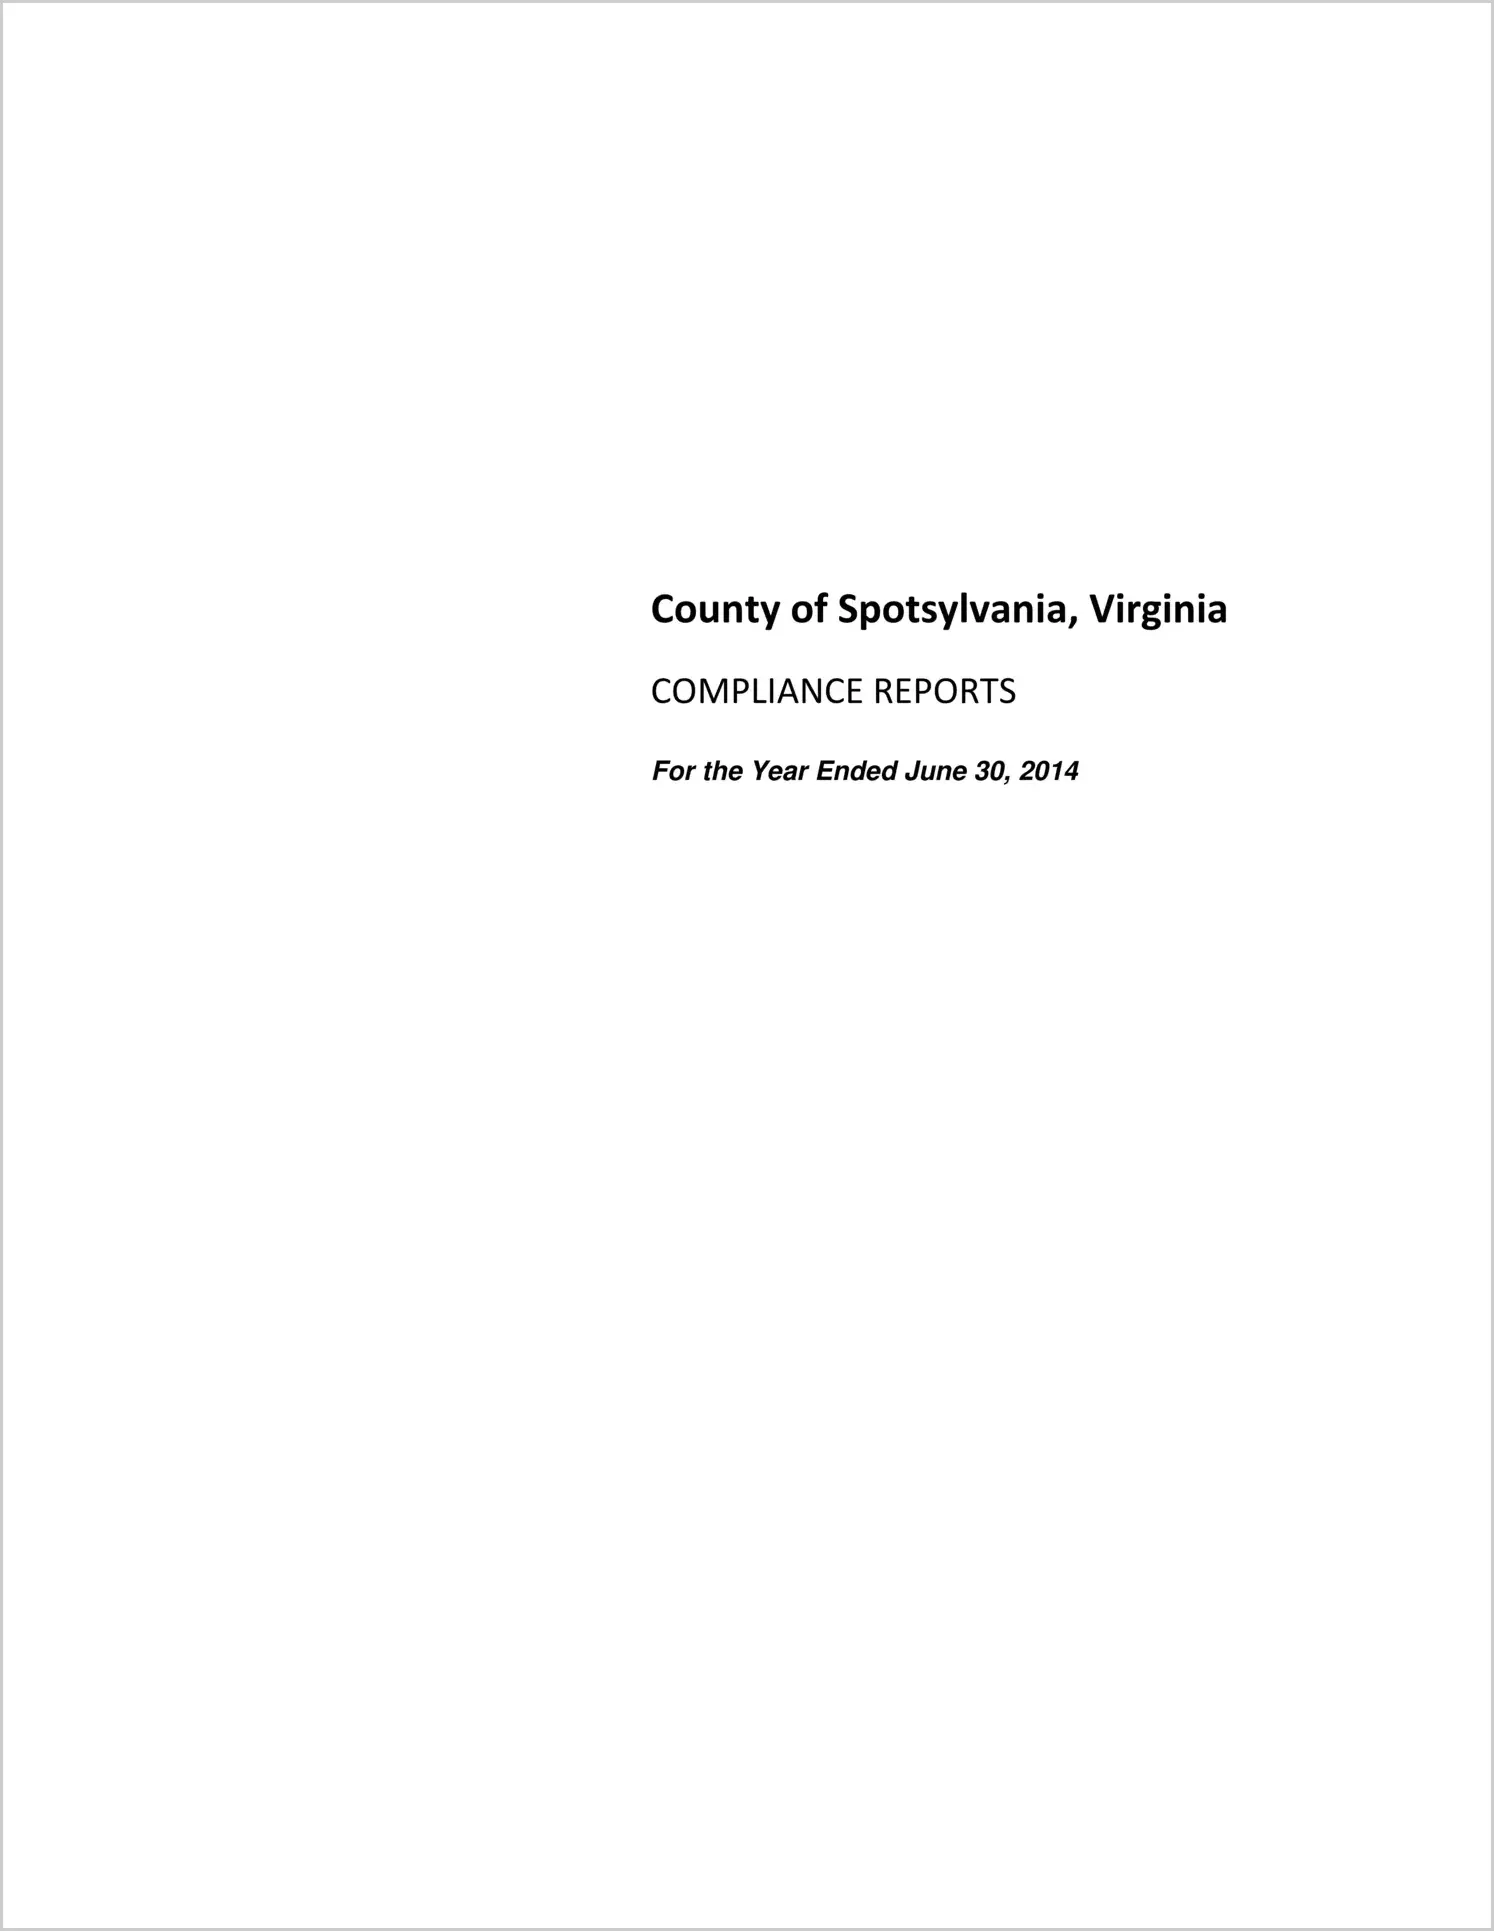 2014 Internal Control and Compliance Report for County of Spotsylvania